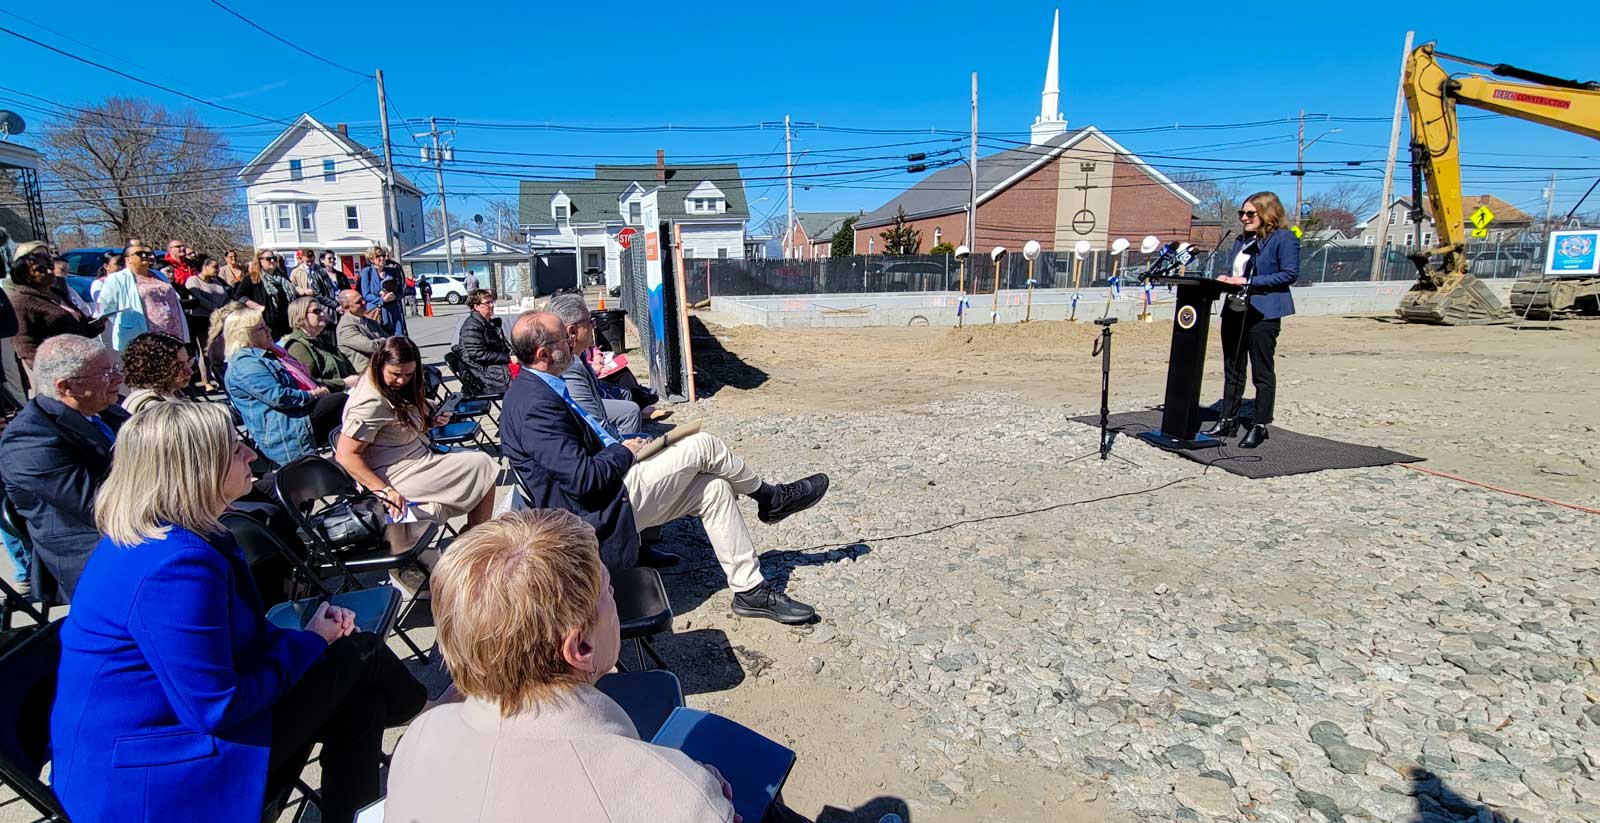 Jennifer Hawkins, Executive Director of ONE Neighborhood Builders, speaks at the groundbreaking event on Monday, April 10, 2023. Photo by Stephen Ide/ONE Neighborhood Builders